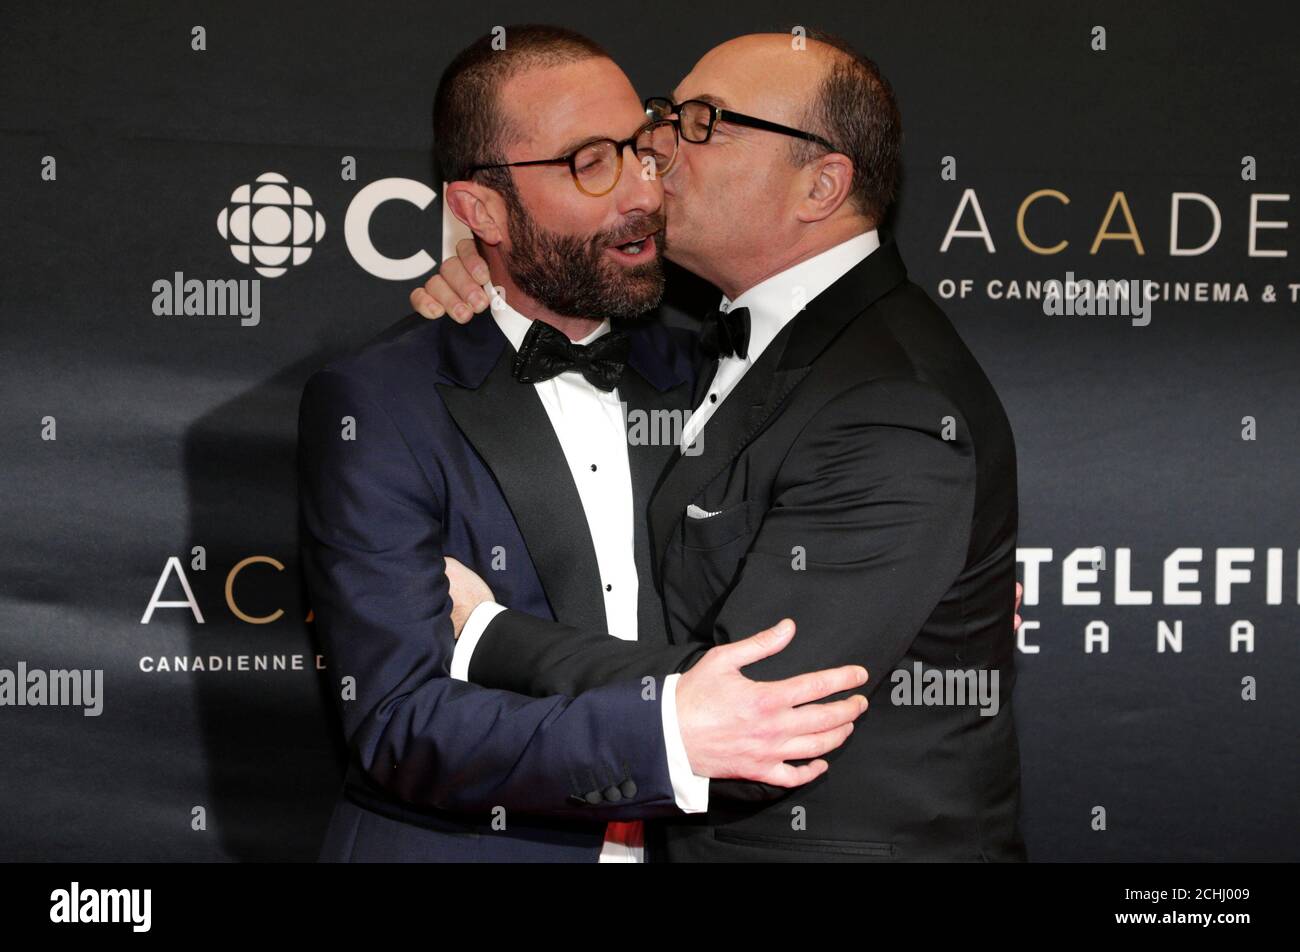 Jacob Tierney, of "Letterkenny," is embraced by Producer Martin Katz, chair  of the Academy of Canadian Cinema and Television, as they arrive on the red  carpet at the 7th annual Canadian Screen